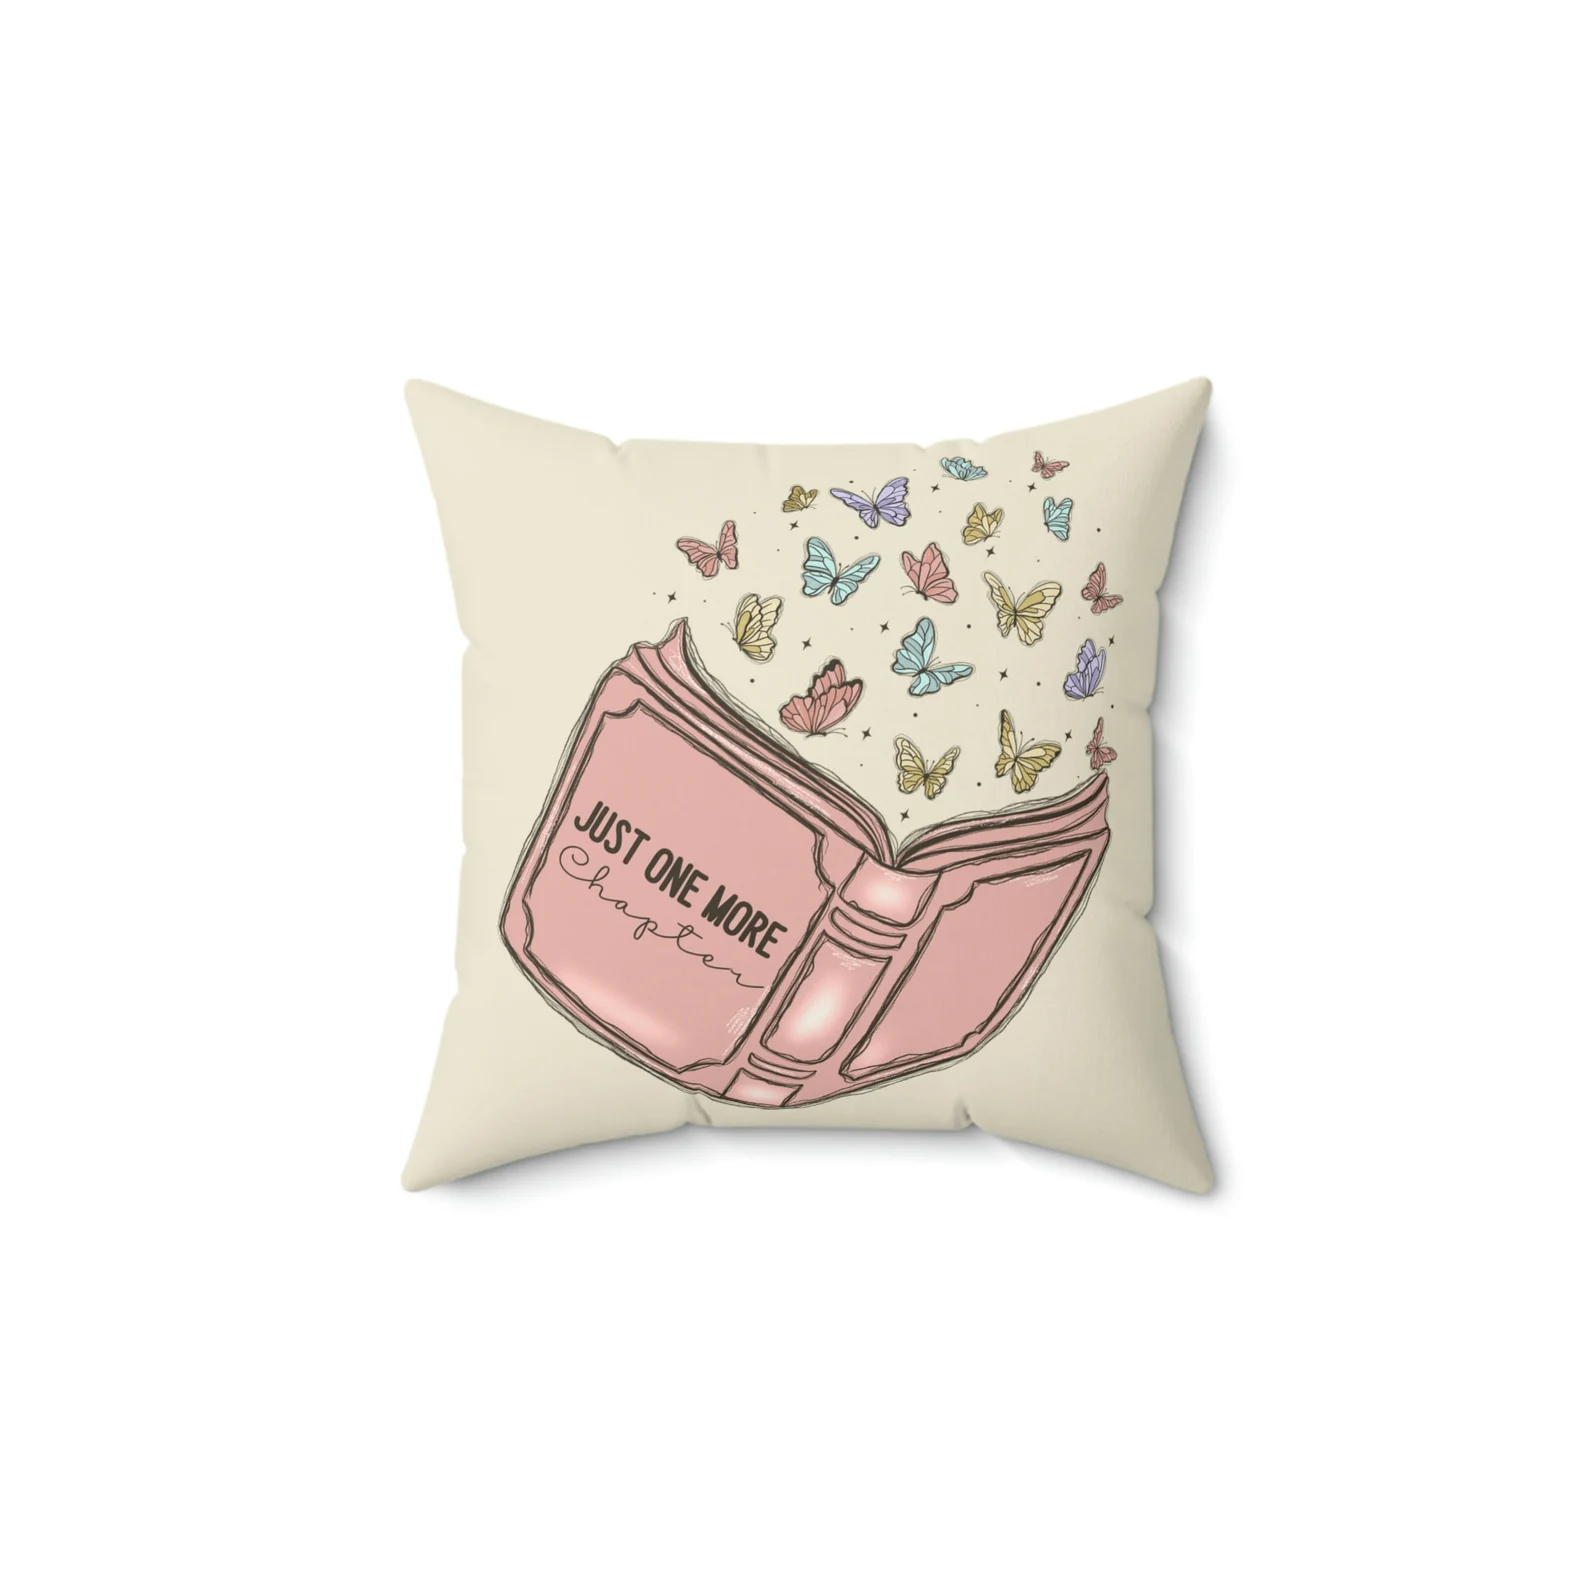 A cream pillow featuring a pink open book and butterflies that reads "Just One More Chapter"